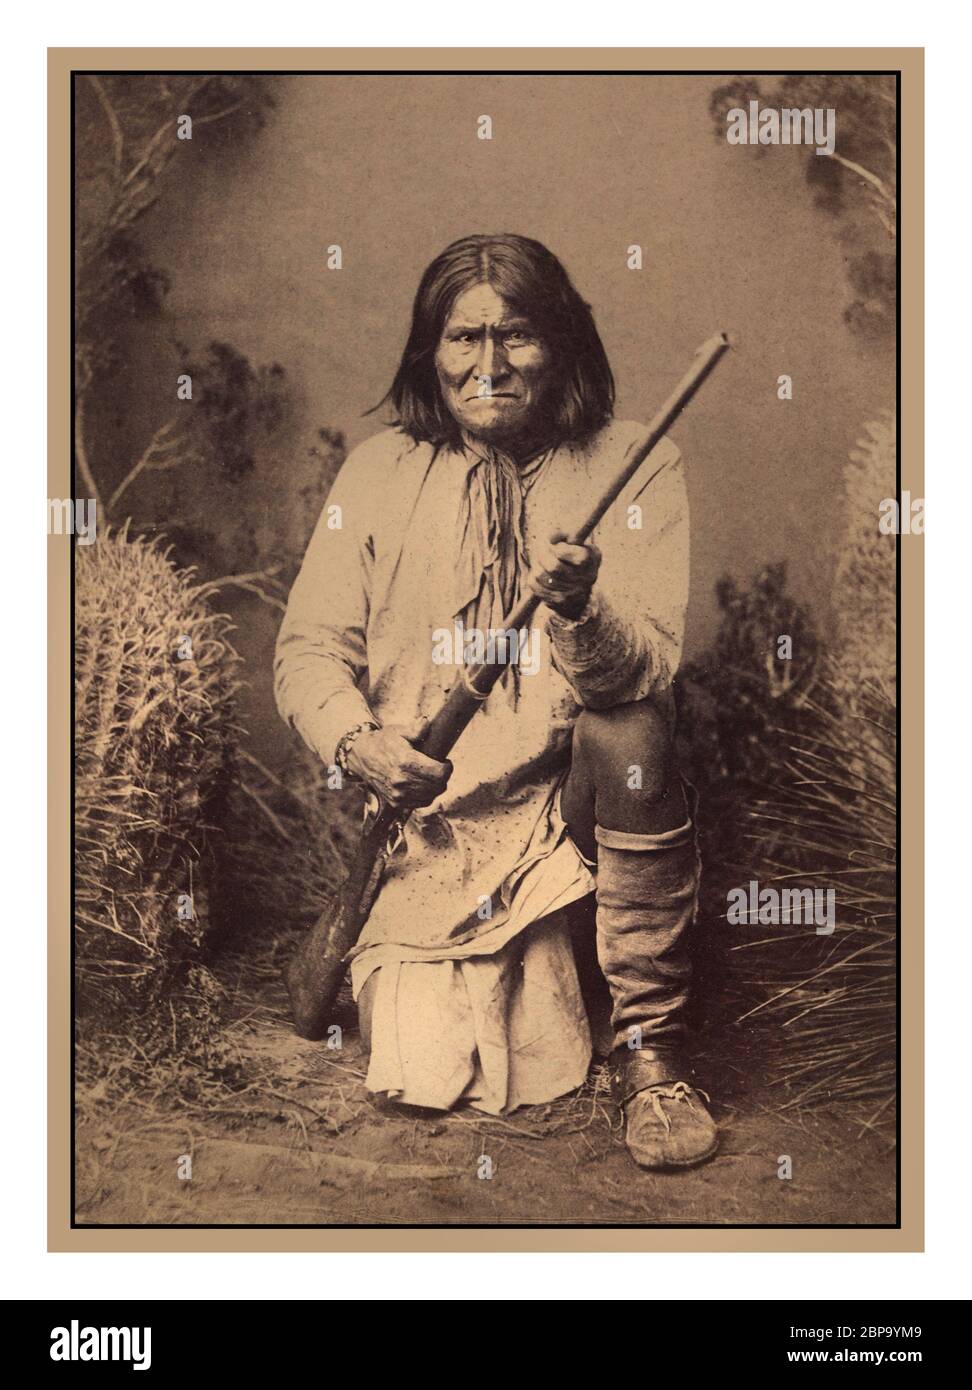 GERONIMO Bedonkohe Apache war leader, Geronimo earned a reputation as a fierce adversary to Mexican and U.S. authorities alike. After his mother, wife, and three children were killed by Mexican soldiers in 1851, he intensified his opposition to those who were trying to subjugate his tribe. Geronimo did not want to be removed to a reservation, and he fought increasingly to protect his traditional way of life in the Southwest. During this period his daring raids and improbable escapes made him a larger-than-life figure in the American imagination. Stock Photo